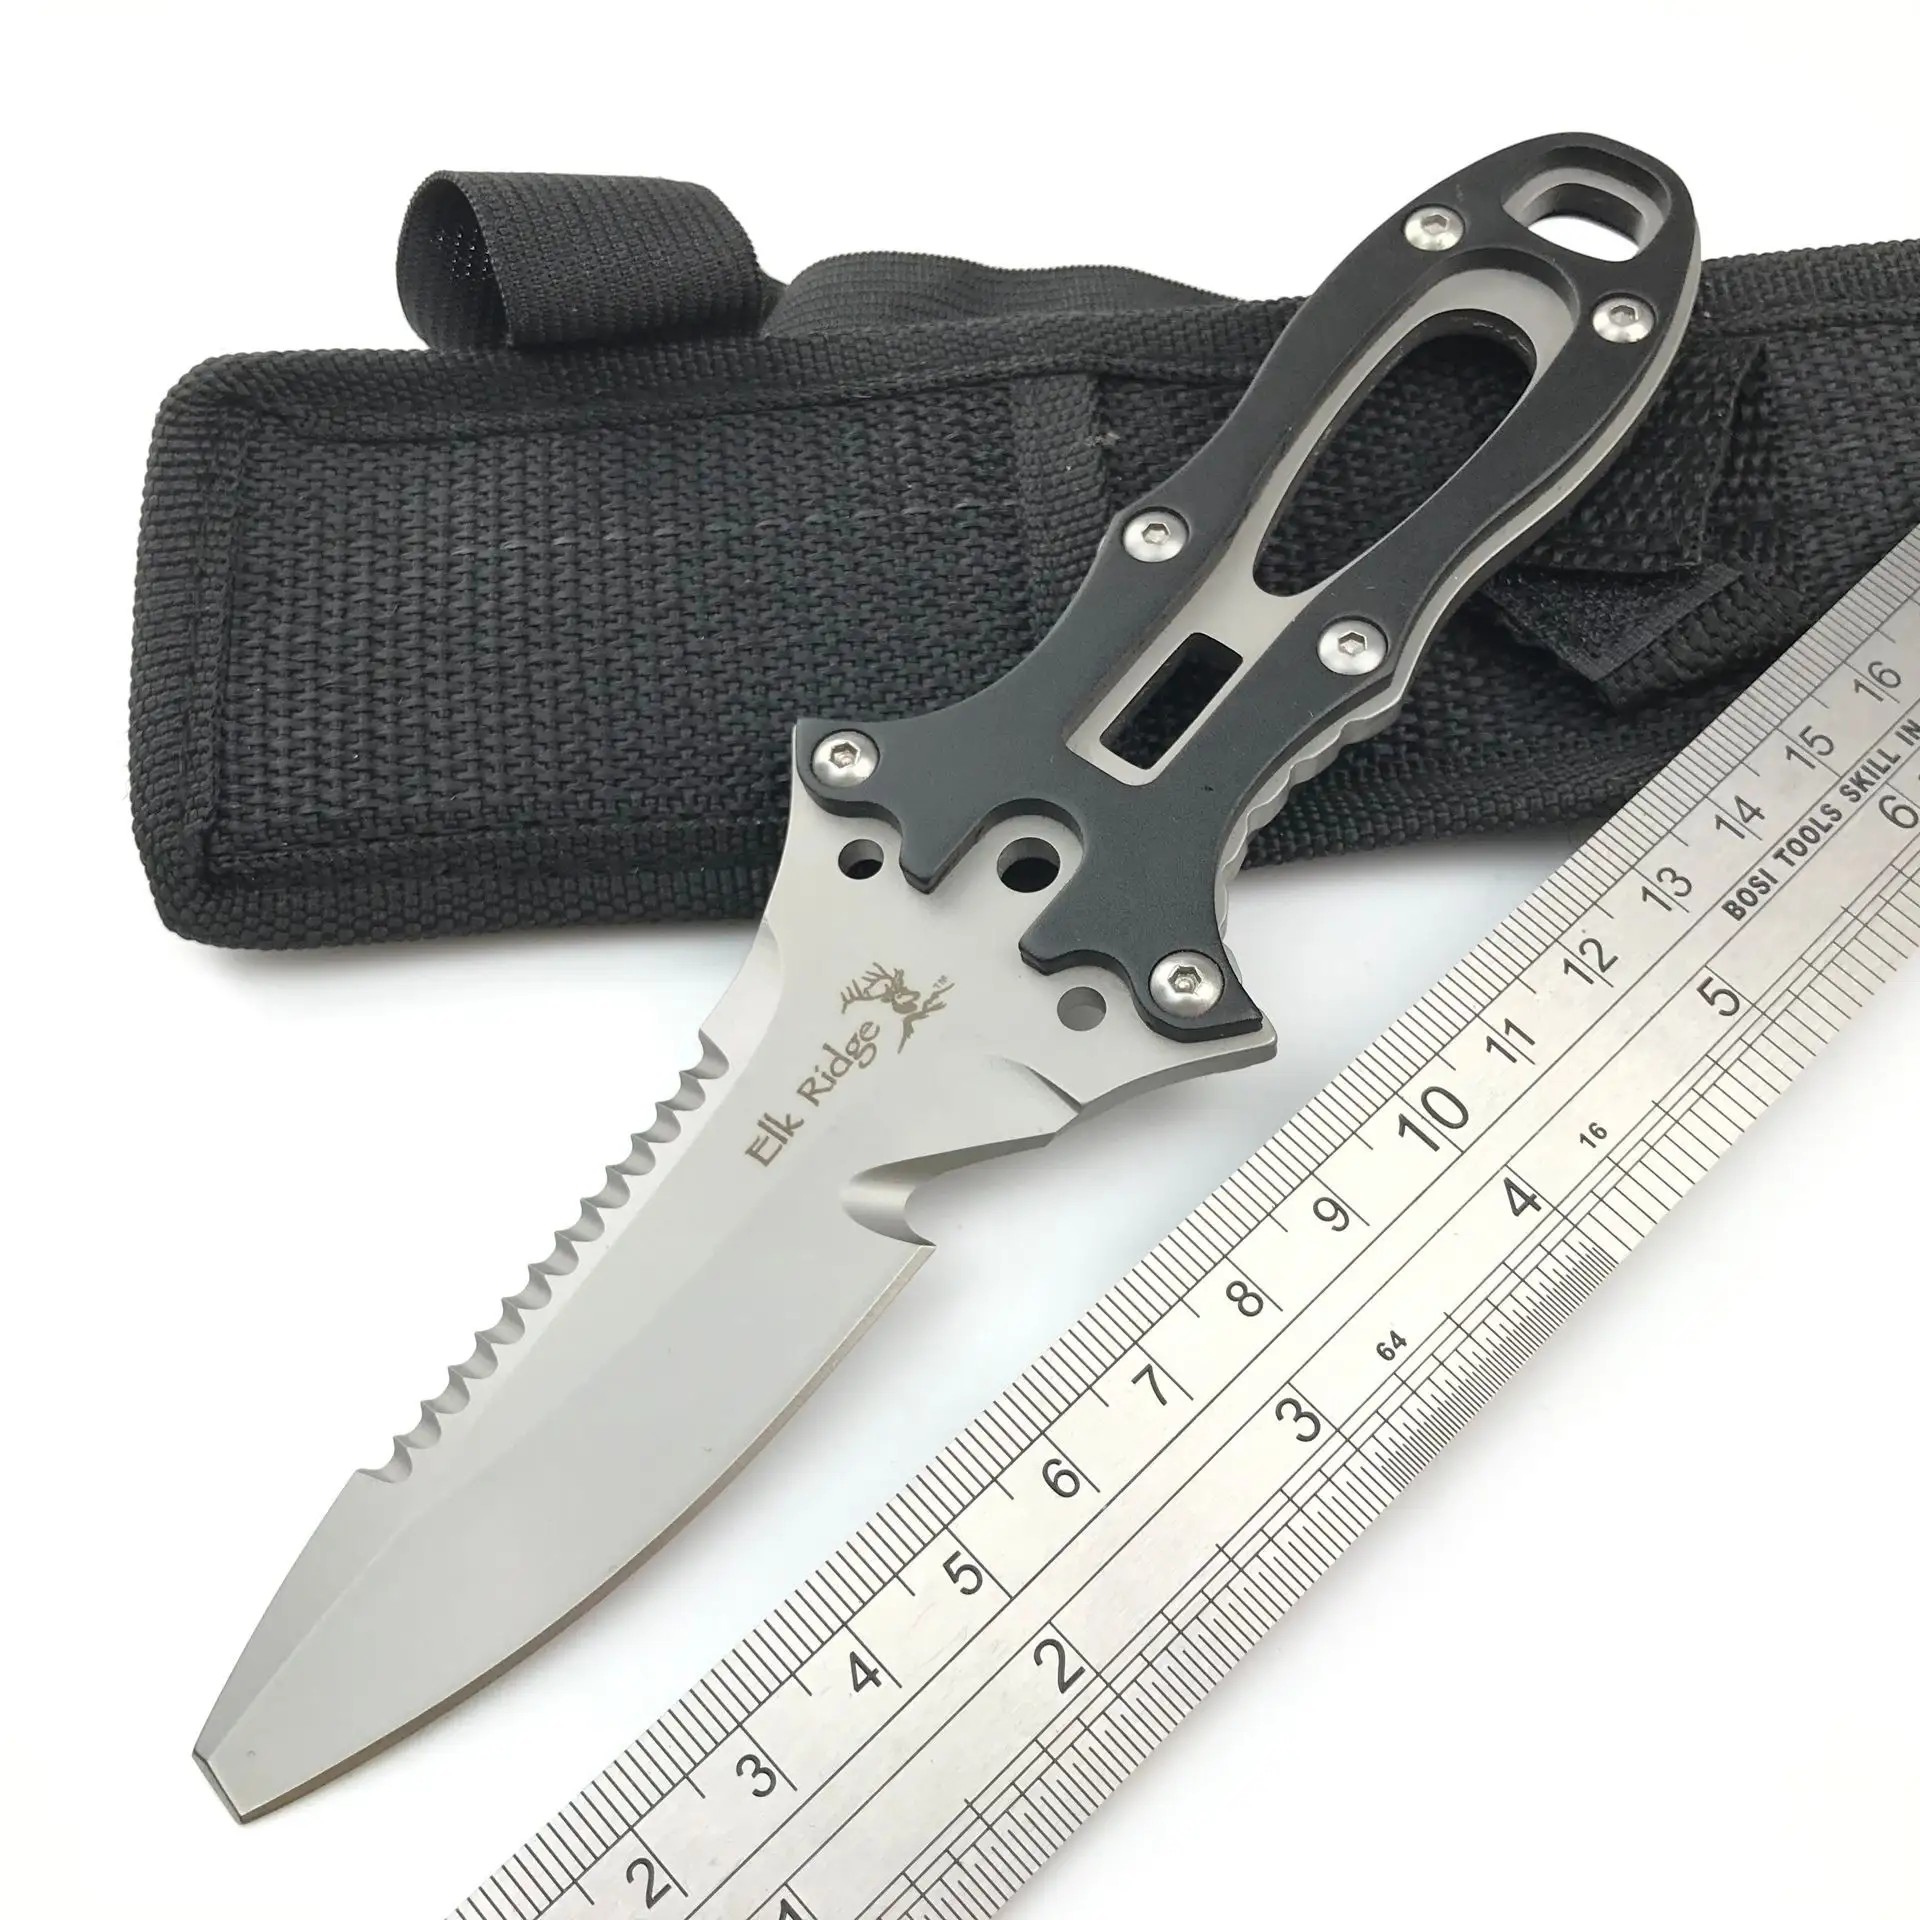 Full tang outdoor Knives camping survival hunting knife with nylon cover